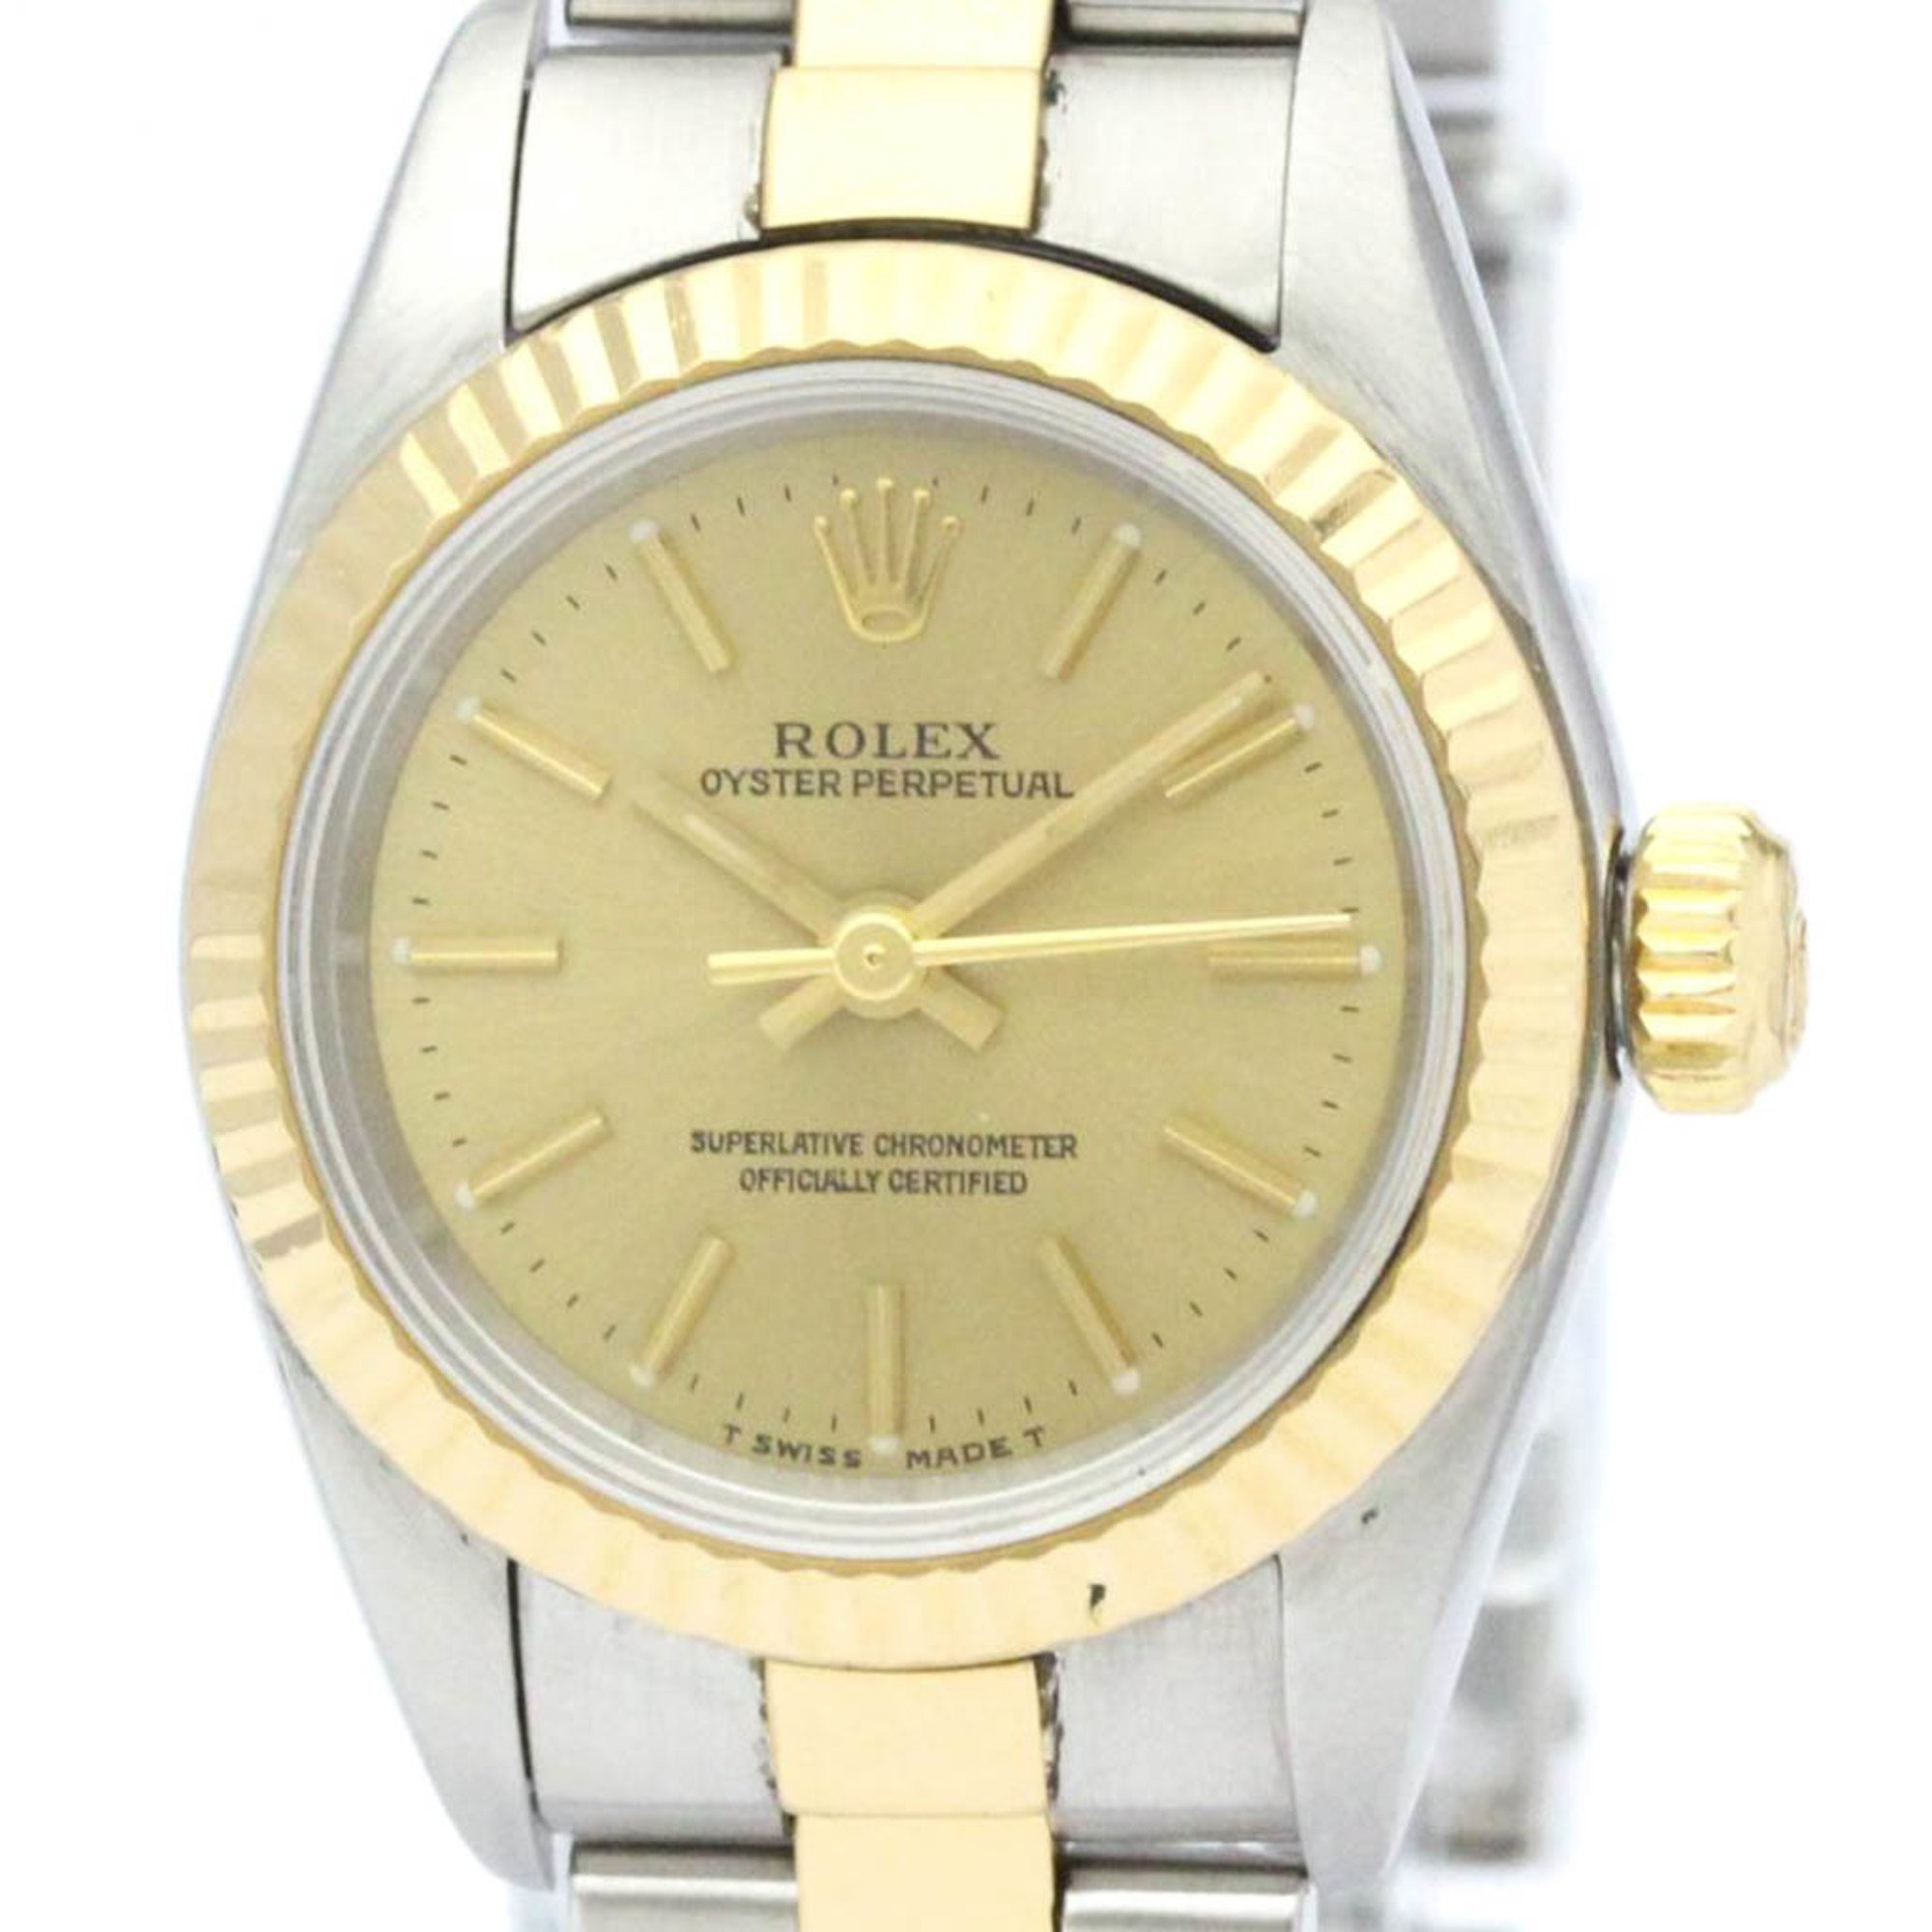 Polished ROLEX Oyster Perpetual U Serial 18K Gold Steel Watch 67193 BF563316